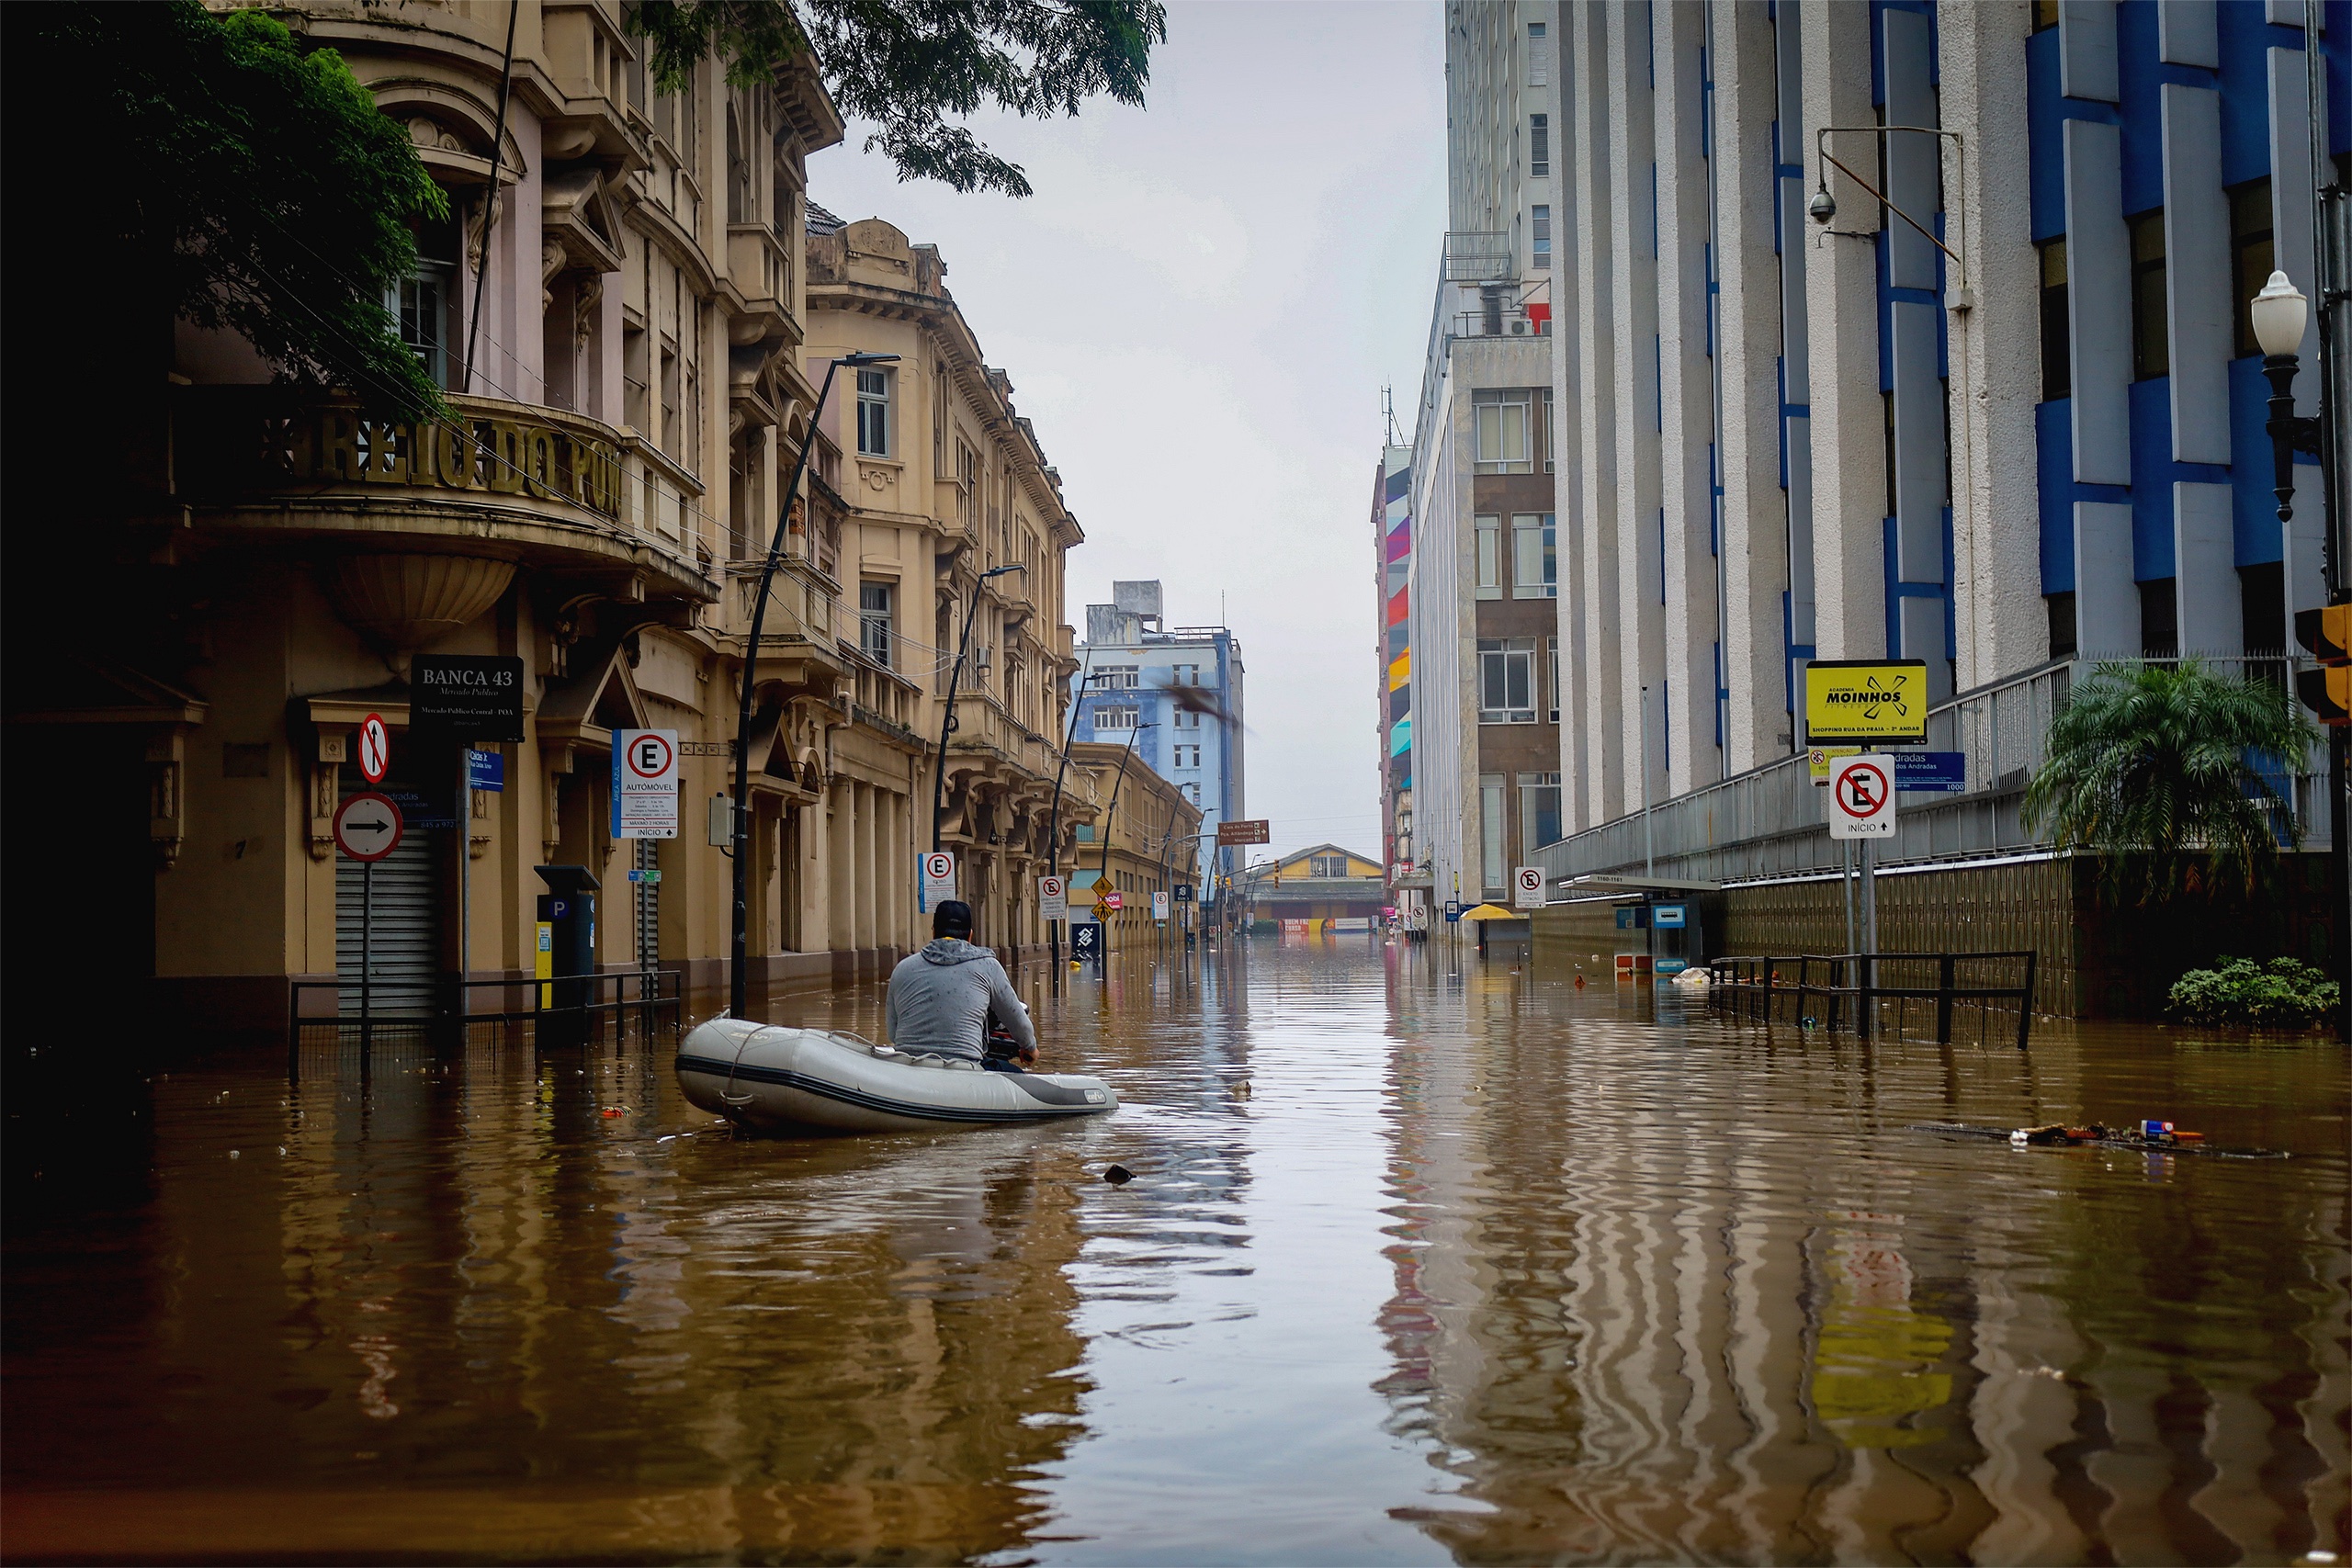 <p>A man navigates the streets of the historic centre of Porto Alegre, Brazil. The city has suffered the worst floods in its history, with the water reaching more than two metres above ground level. (Image: <a href="https://www.flickr.com/photos/midianinja/53727820655/in/album-72177720317043955/">Maí Yandara</a> / <a href="https://www.flickr.com/people/midianinja/">Mídia NINJA</a>, <a href="https://creativecommons.org/licenses/by-nc/2.0/">CC BY NC</a>)</p>